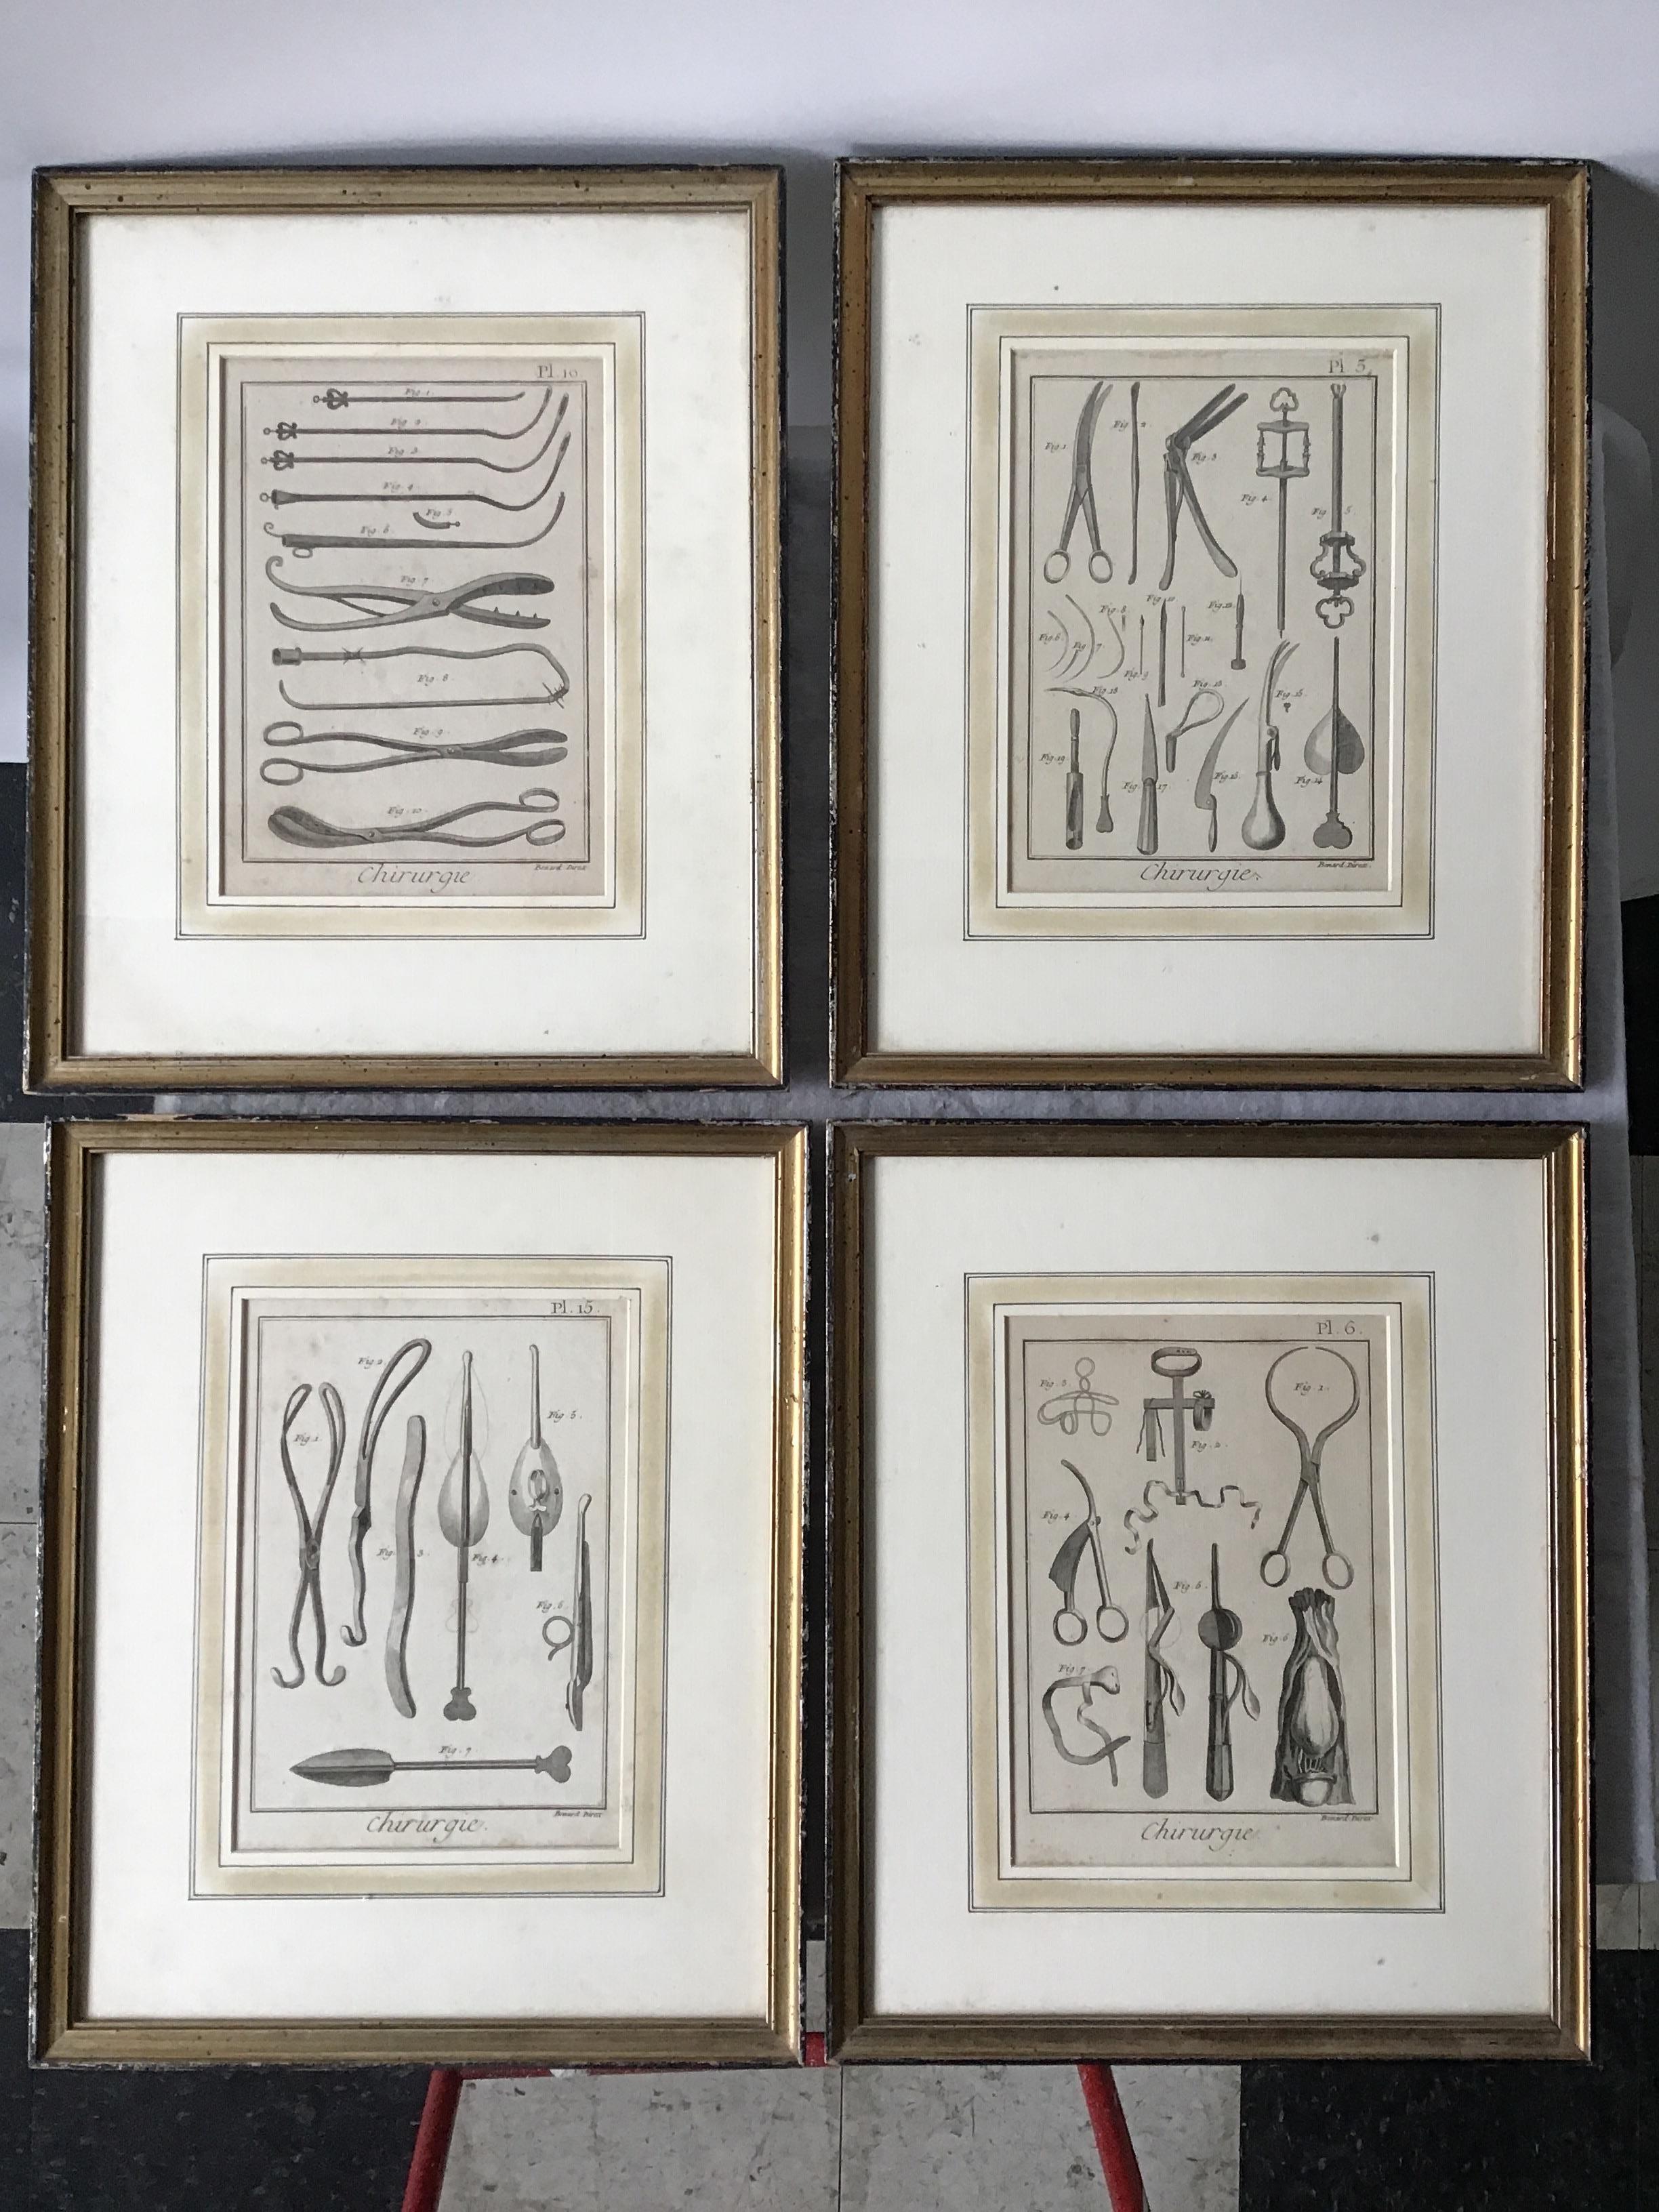 Four 1880s French surgical instrument prints.